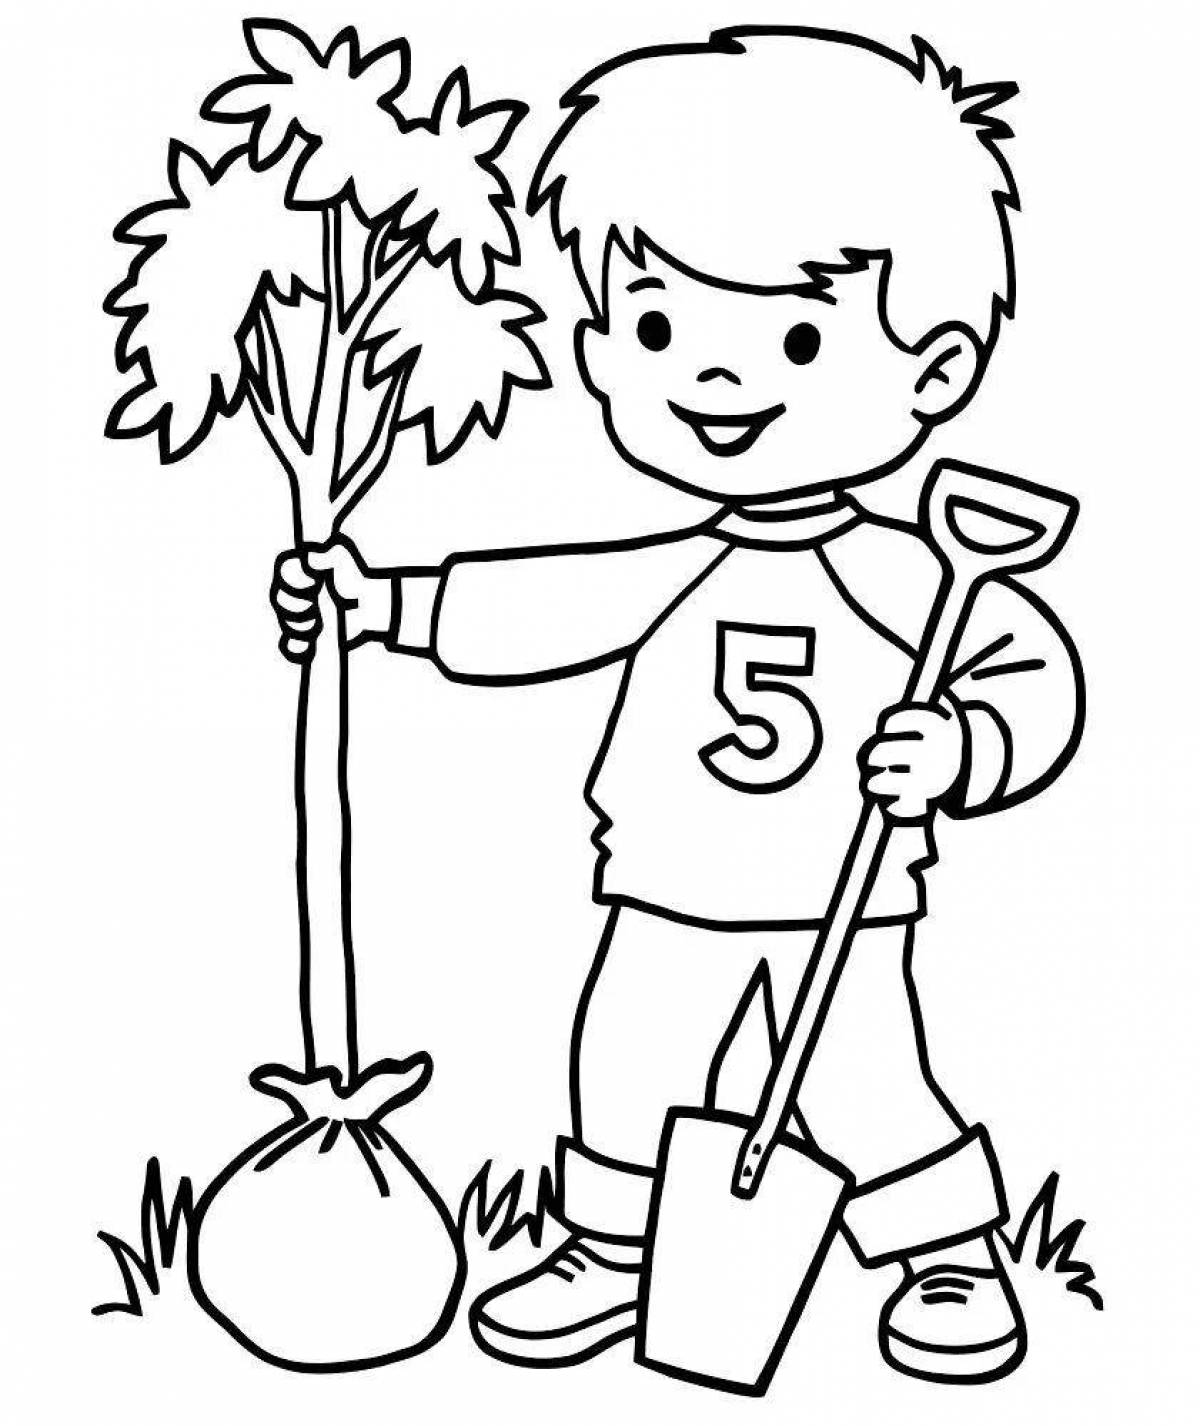 Coloring page amazing green friend